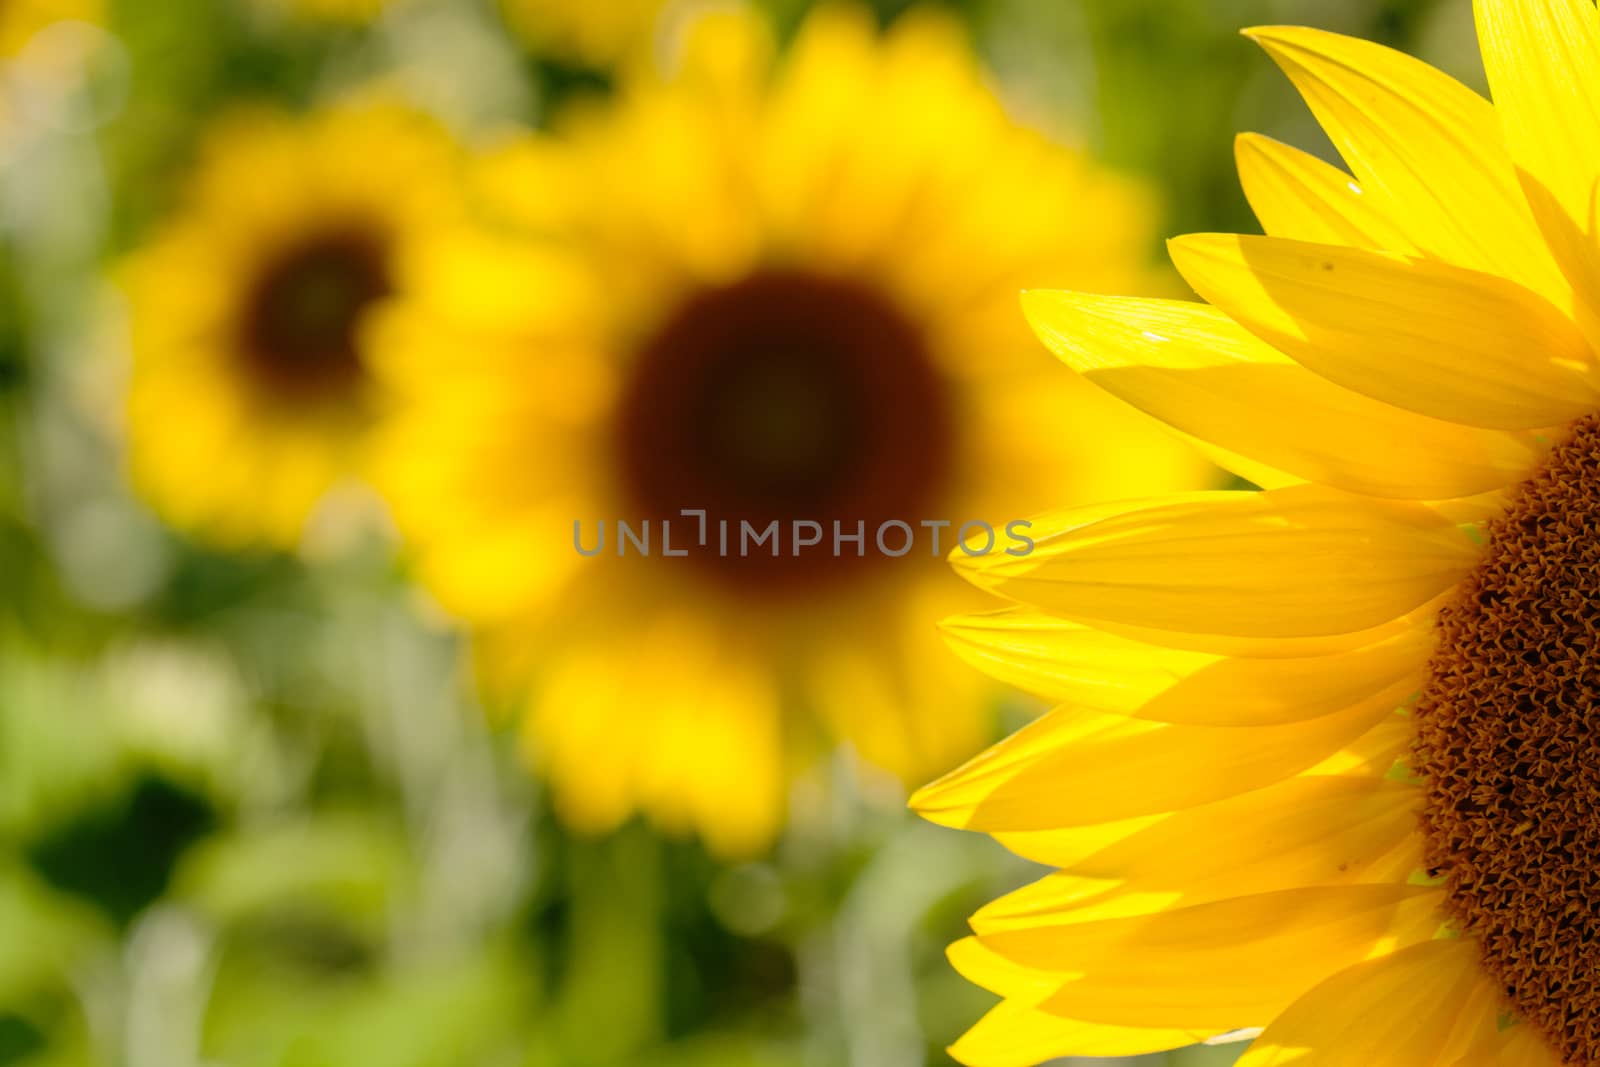 Crop of sunflower plants in Tuscany